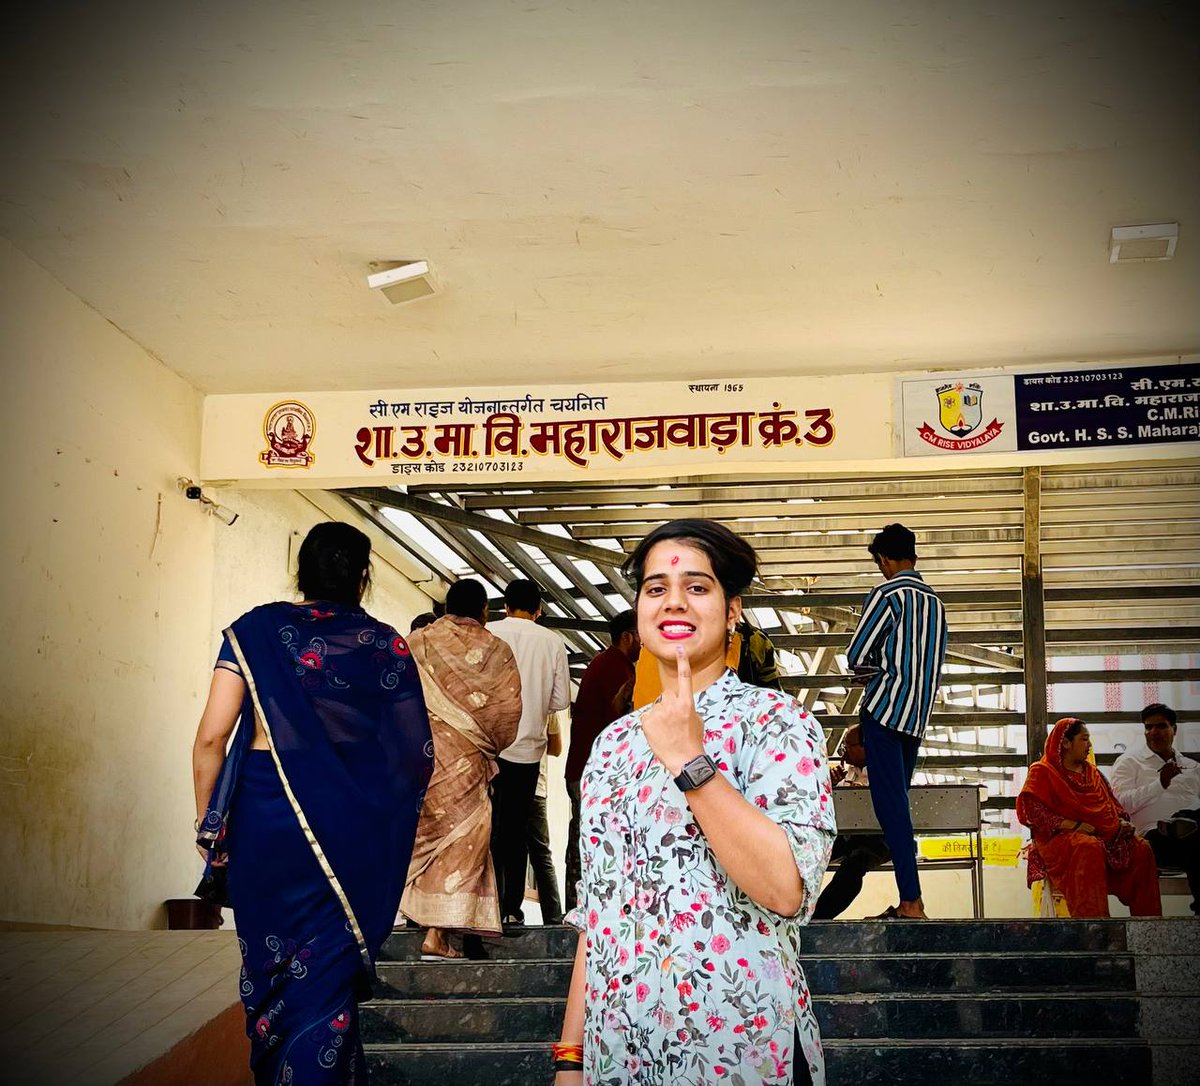 National Secretary @ishaliniverma casts her Vote in the ongoing festival of democracy. Let's join hands in prioritising our nation's interests by casting our vote responsibly. #NationFirstVotingMust #ABVP #LokSabhaElections2024 🗳️